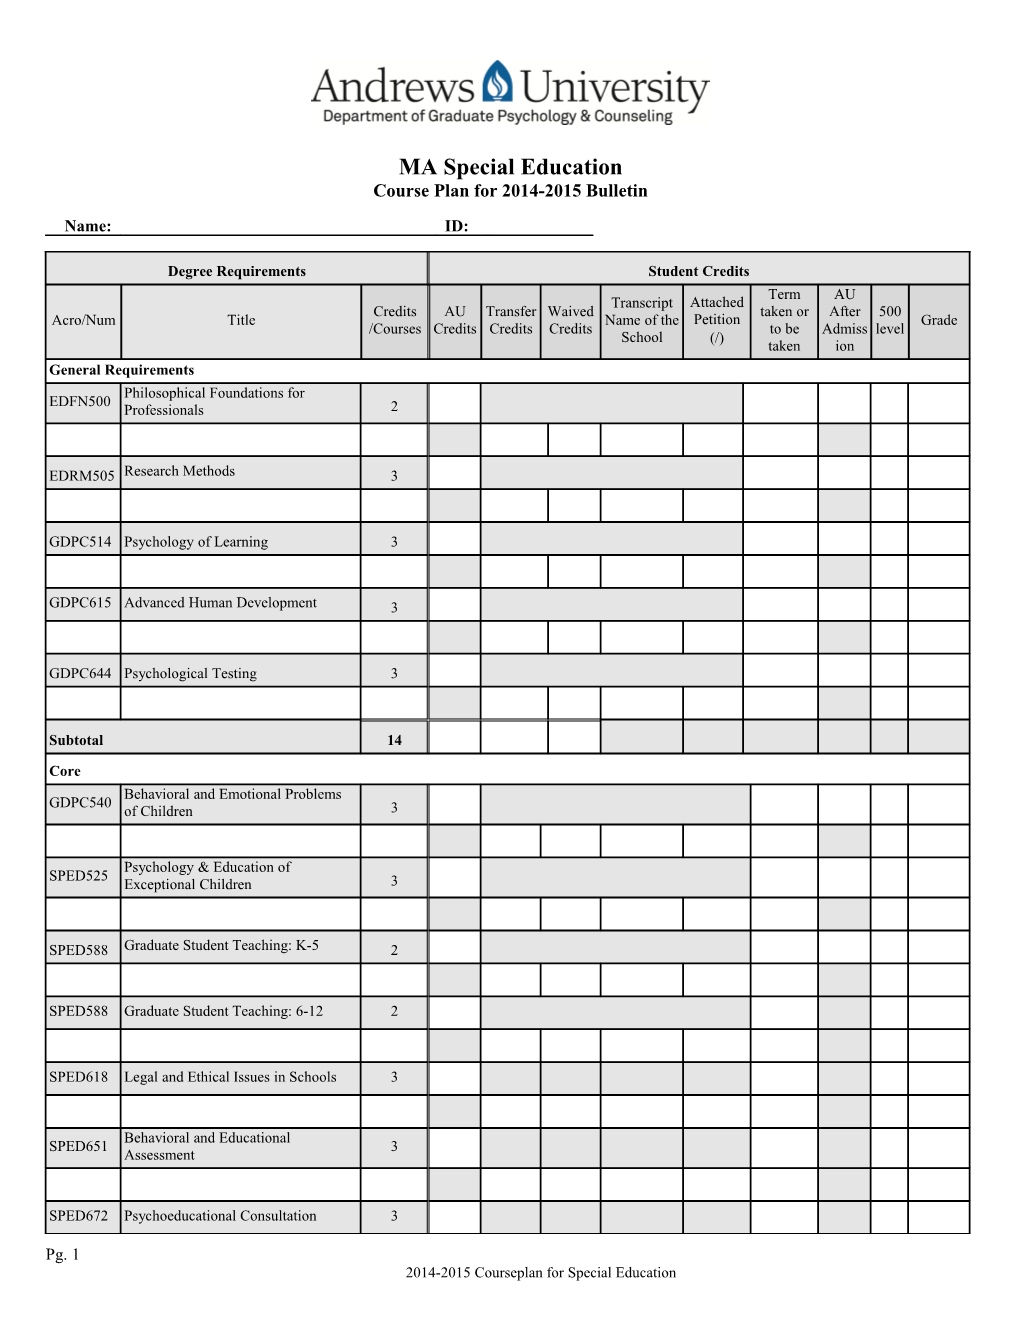 MA in Community Counseling Course Plan B 2005-2006 Bulletin